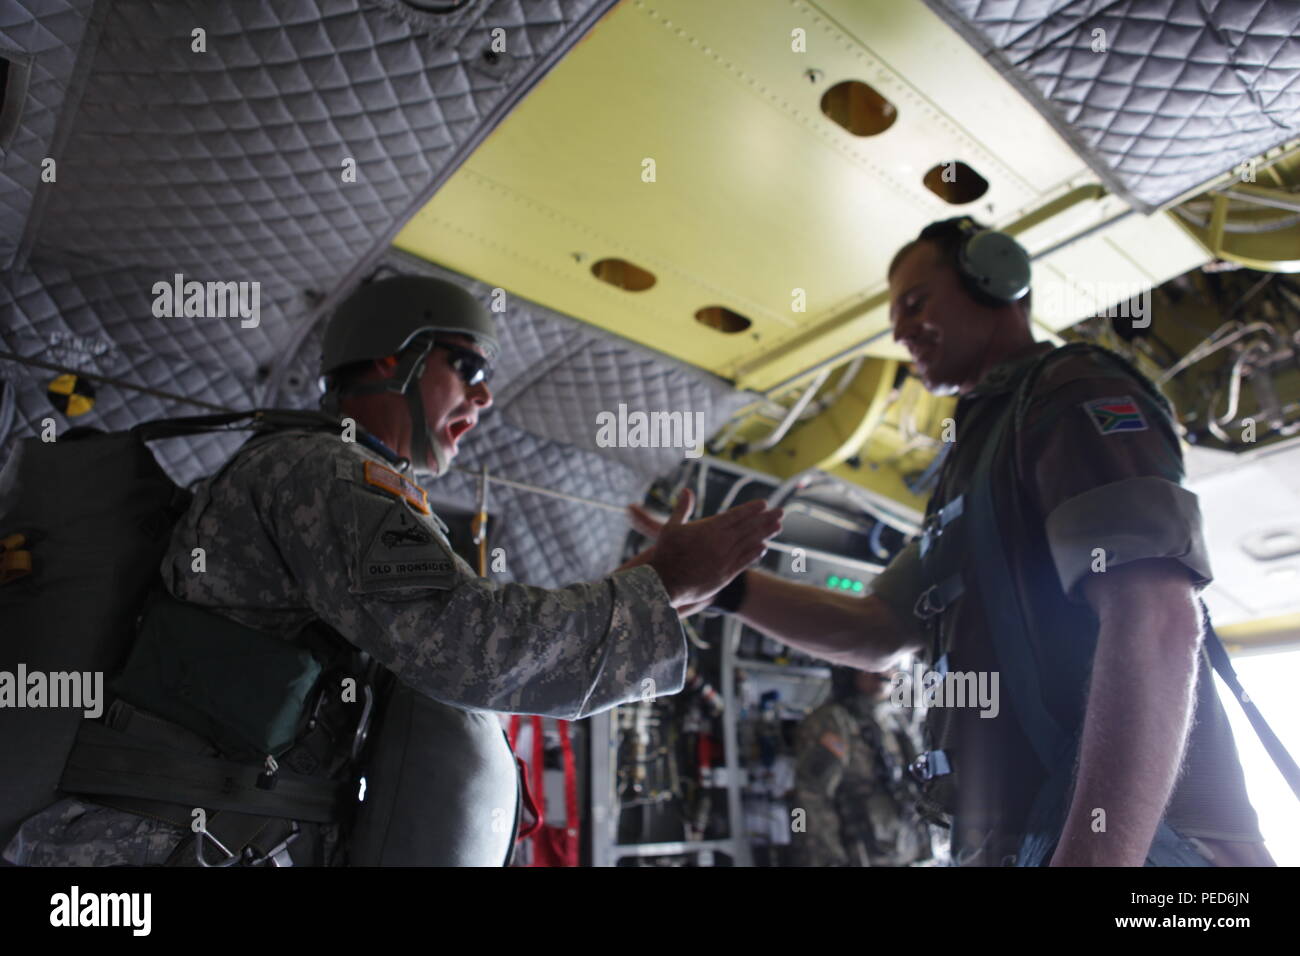 South African Lt. Col. Laurel Thatcher receives the signal from the first jumper that everything is 'All OK' before sending them out of a U.S. Army CH-47 Chinook during the international wing exchange jump, Aug. 3, 2015.  Leapfest is an International parachute competition hosted by the 56th Troop Command, Rhode Island National Guard to promote high level technical training and esprit de corps within the International Airborne community. (U.S. Army Photo by Sgt. 1st Class Horace Murray/Released) Stock Photo